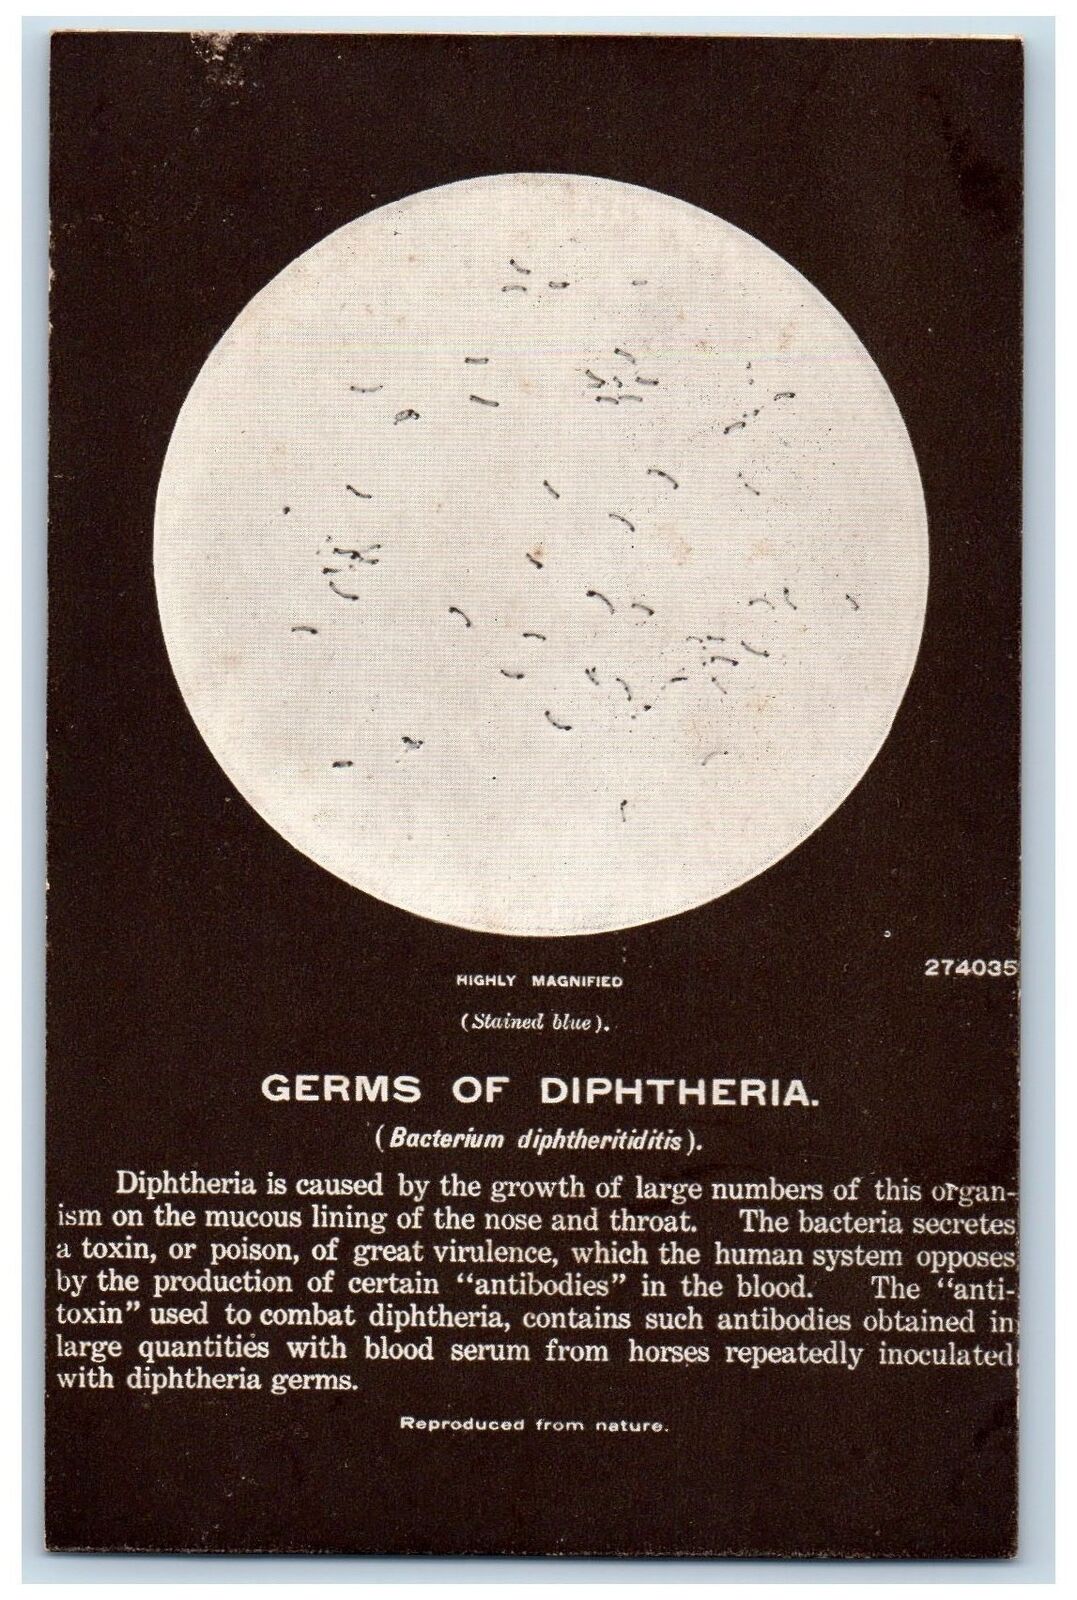 c1950's Germs Of Diphtheria Microscopic Plants Through Lenses Bacteria Postcard